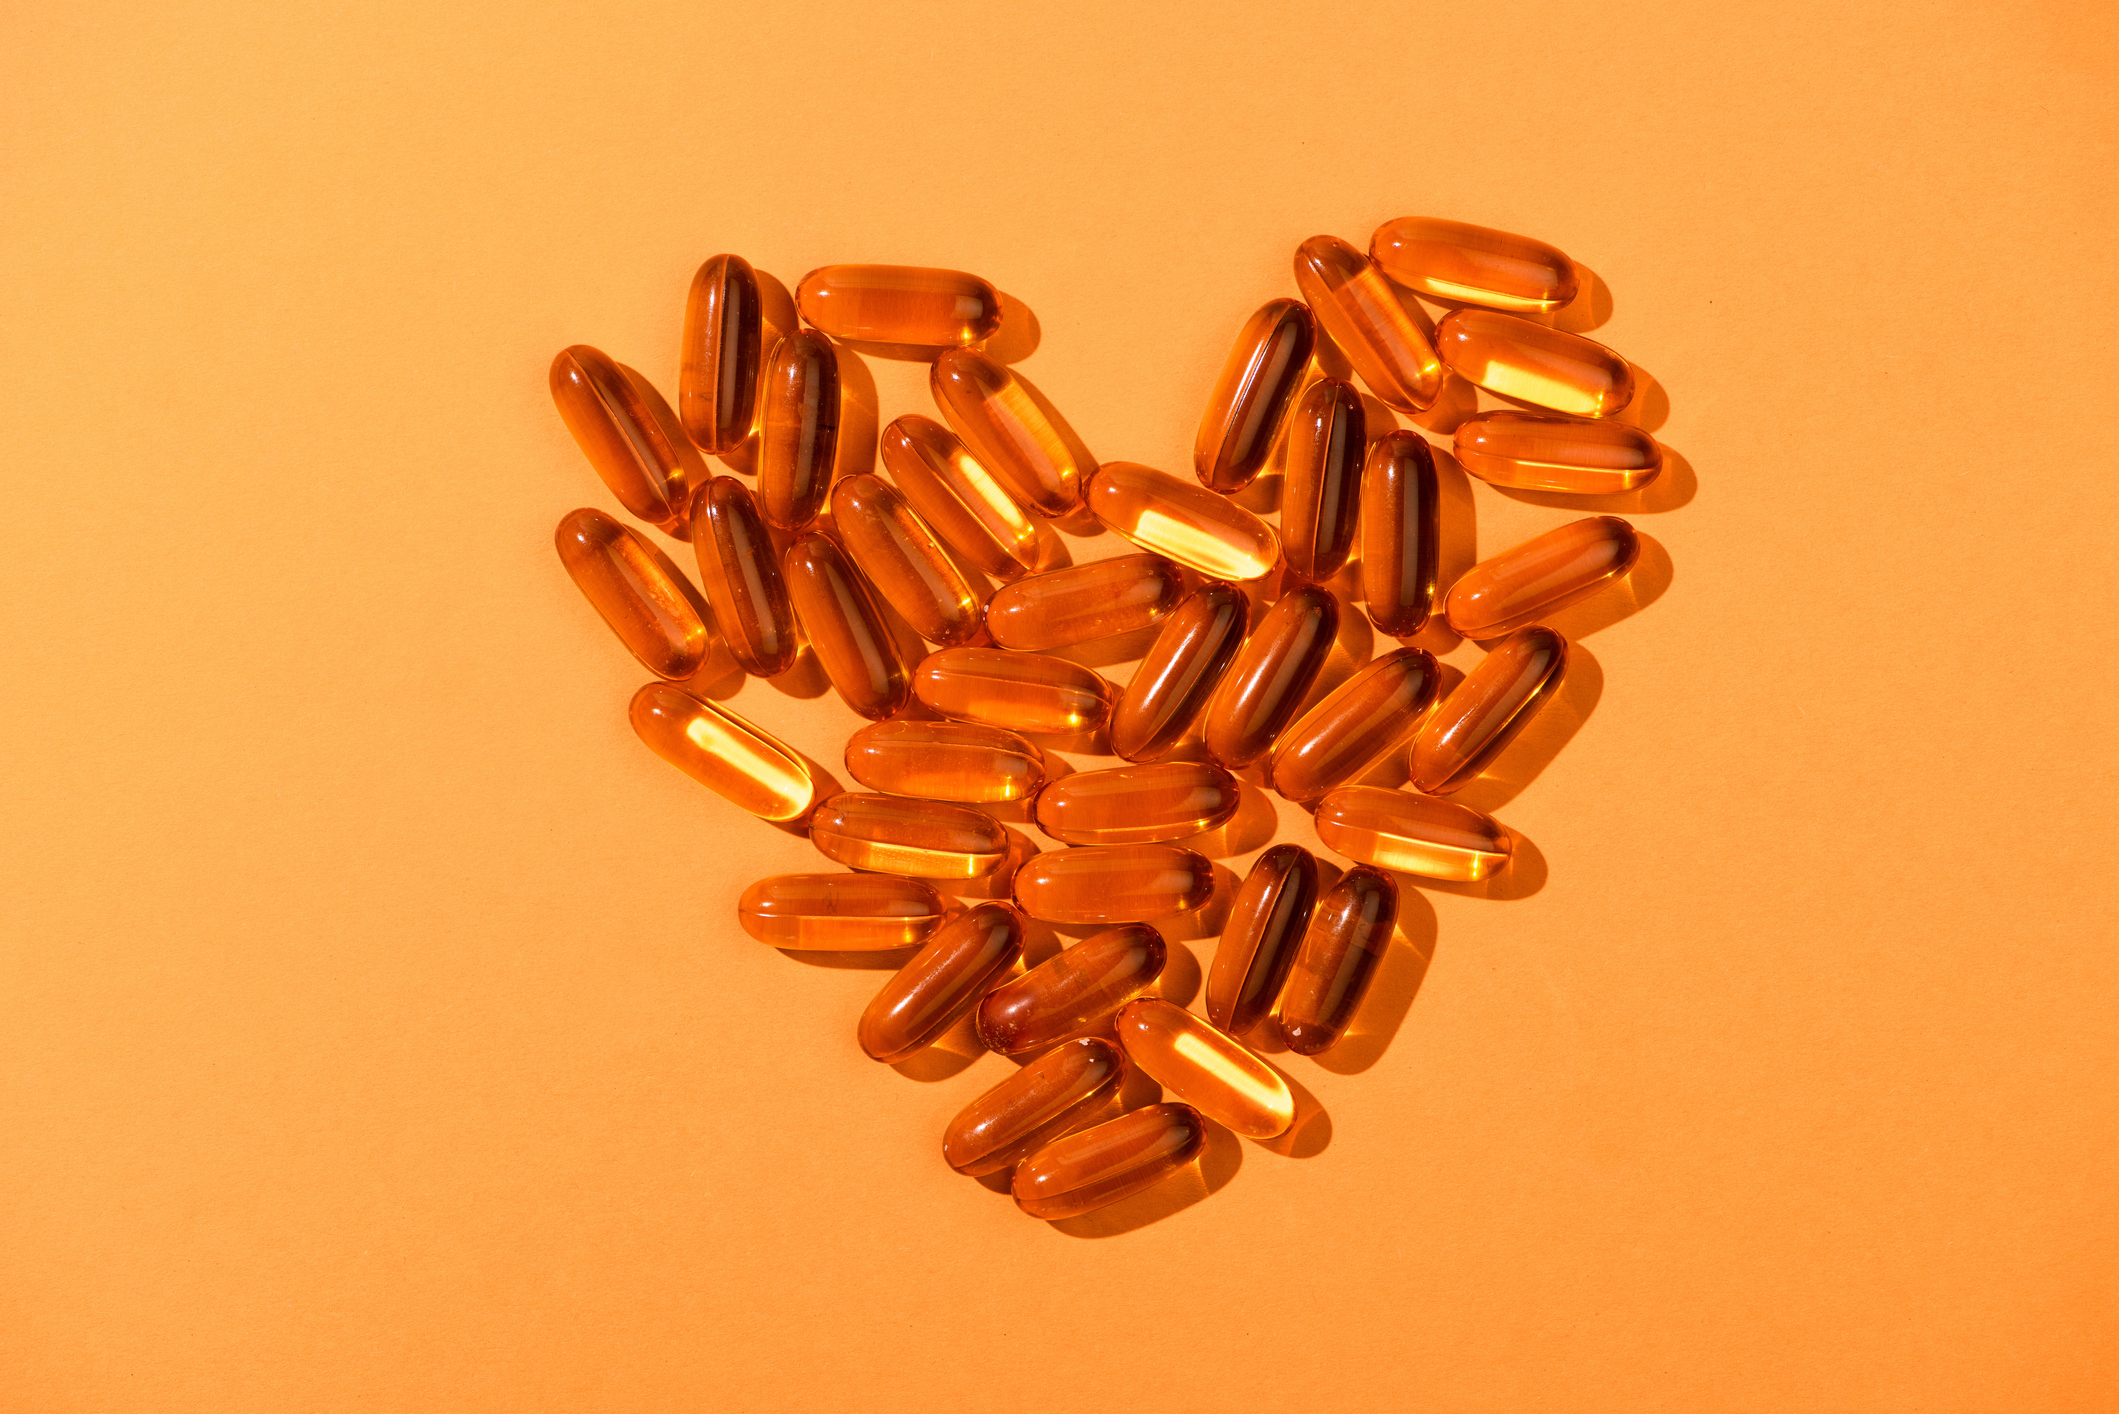 Authoritative evidence supports increasing omega-3s for cardio protection